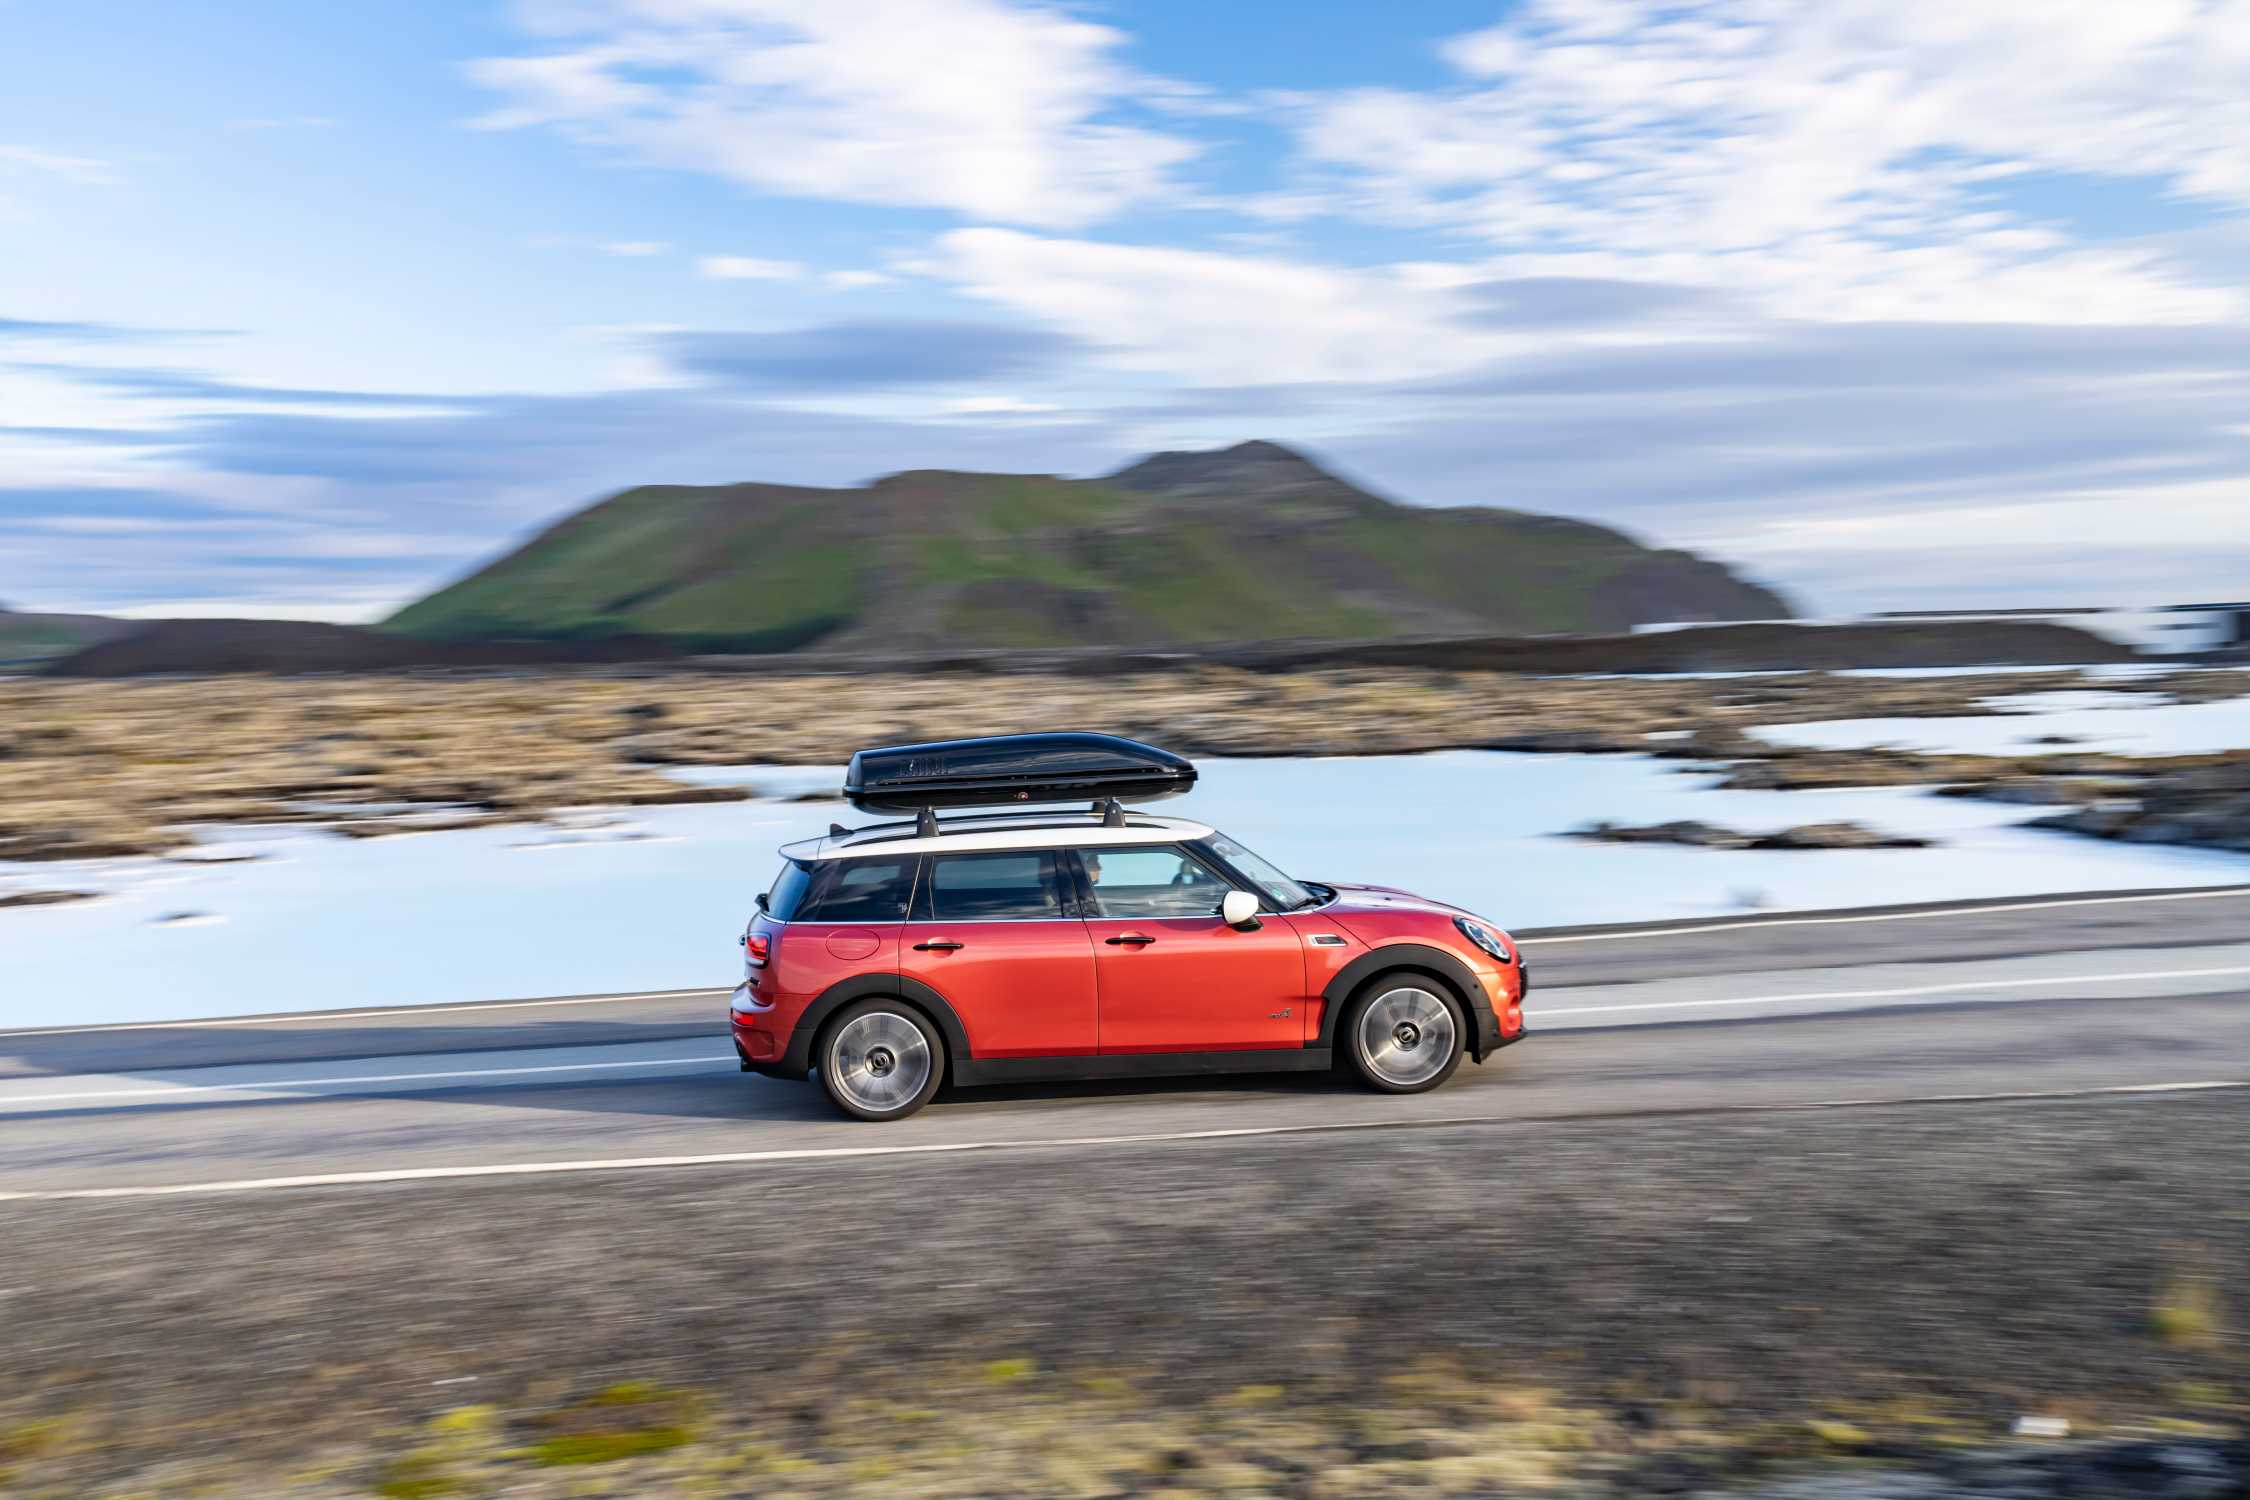 From a barren island to a trendy tourist destination: Discover Iceland's breathtaking nature with the MINI Cooper S Clubman ALL4.